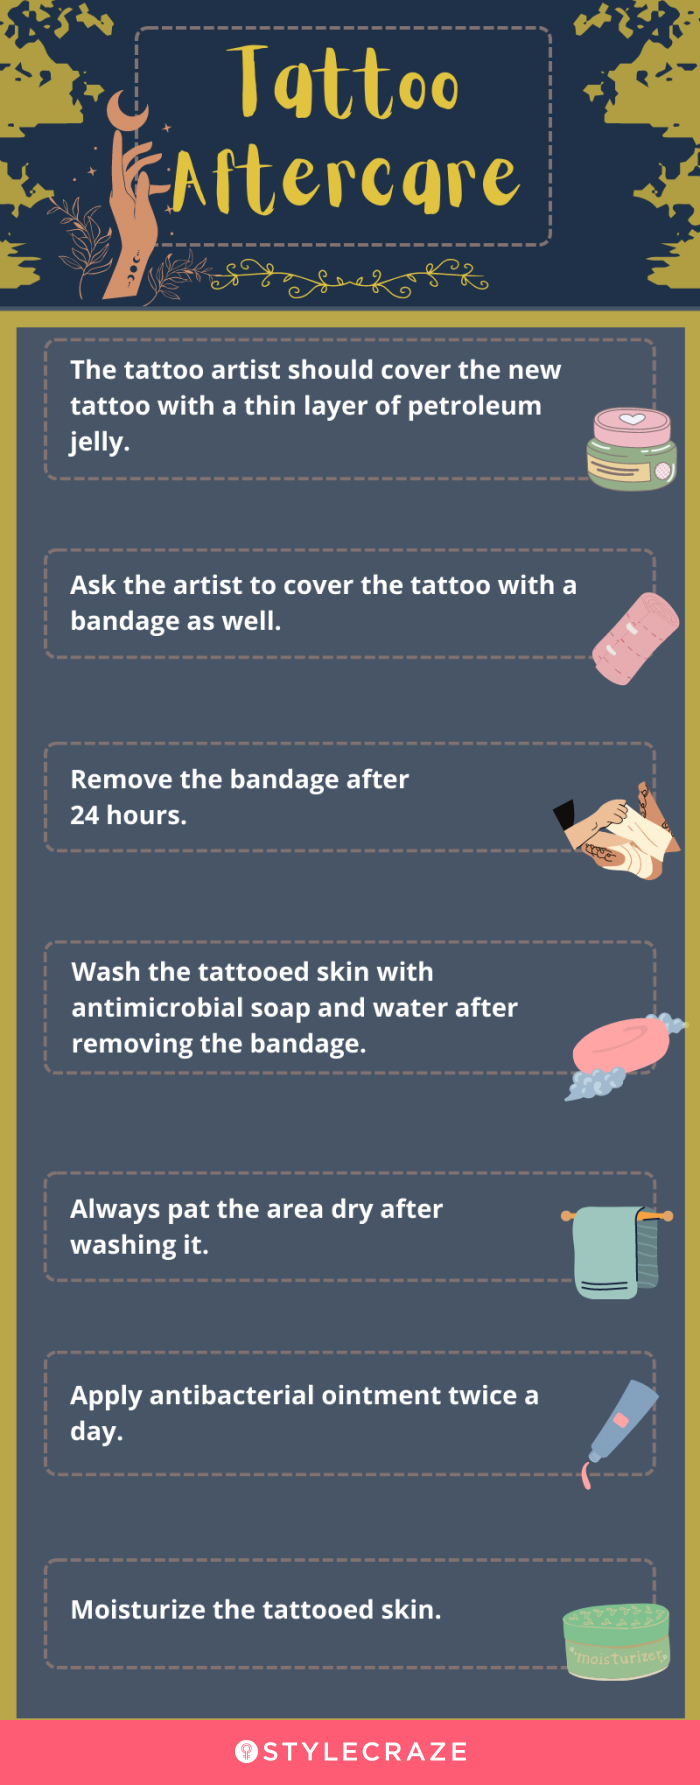 tattoo aftercare tips [infographic]